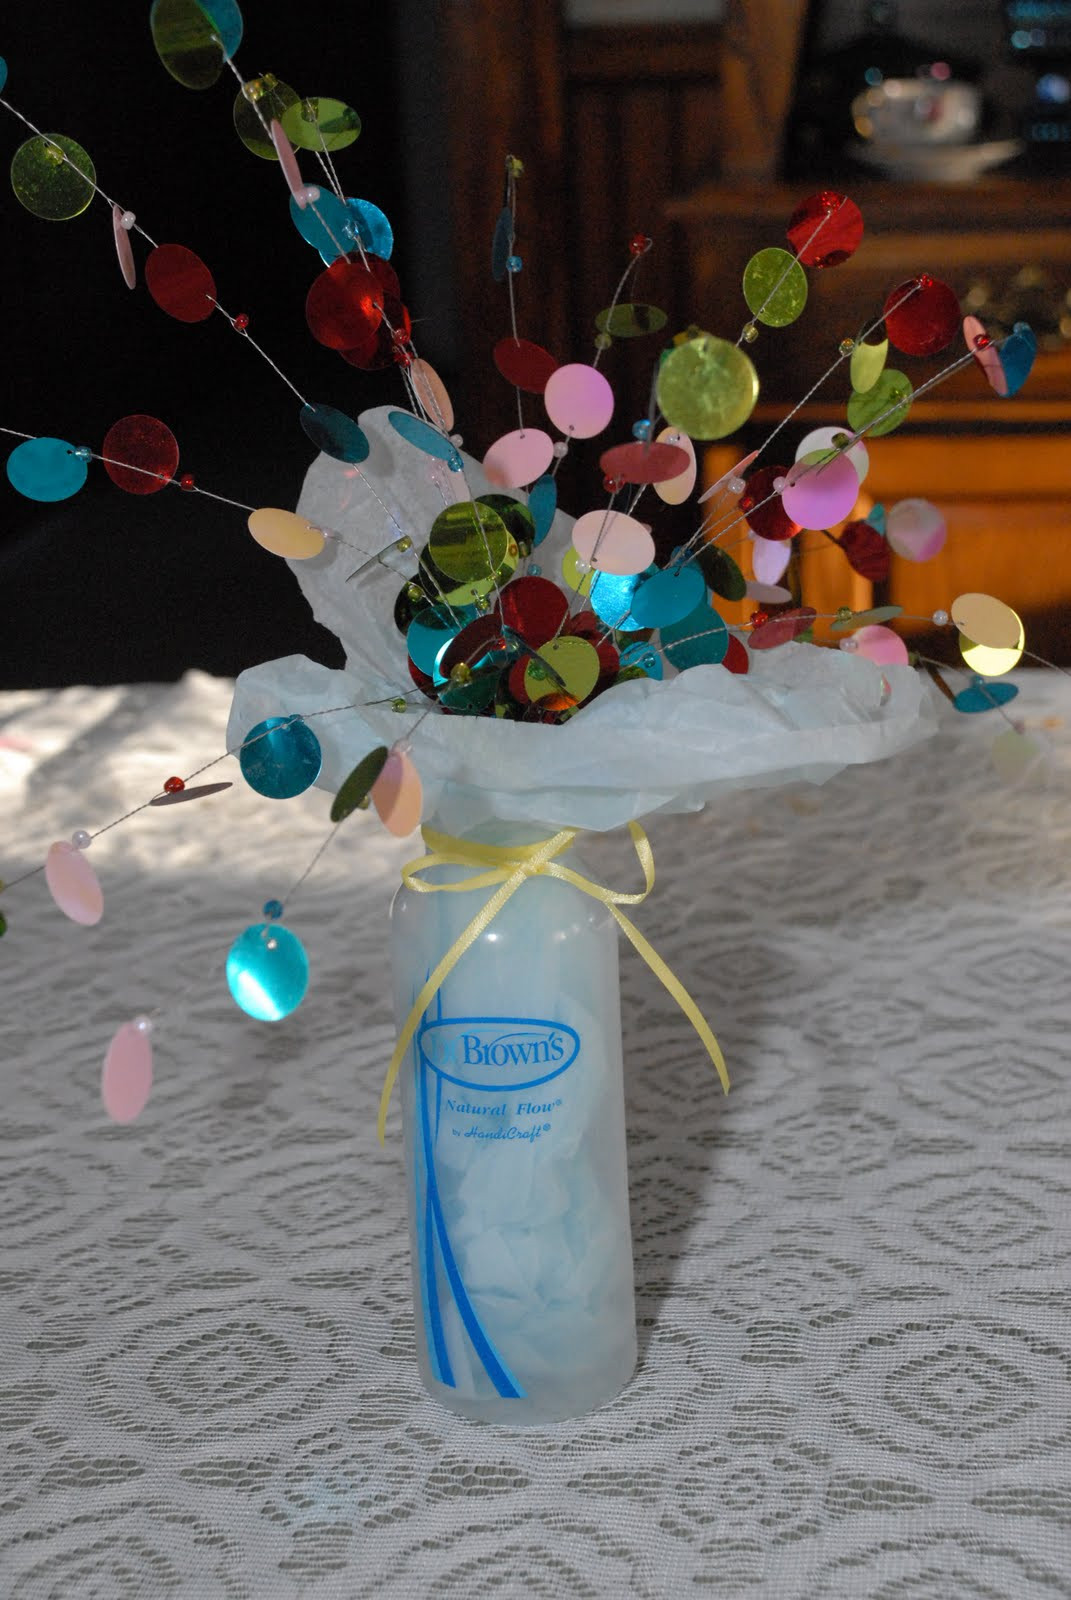 Baby Shower Centerpieces DIY
 Life More Simply DIY Frugal and Green Centerpieces for a